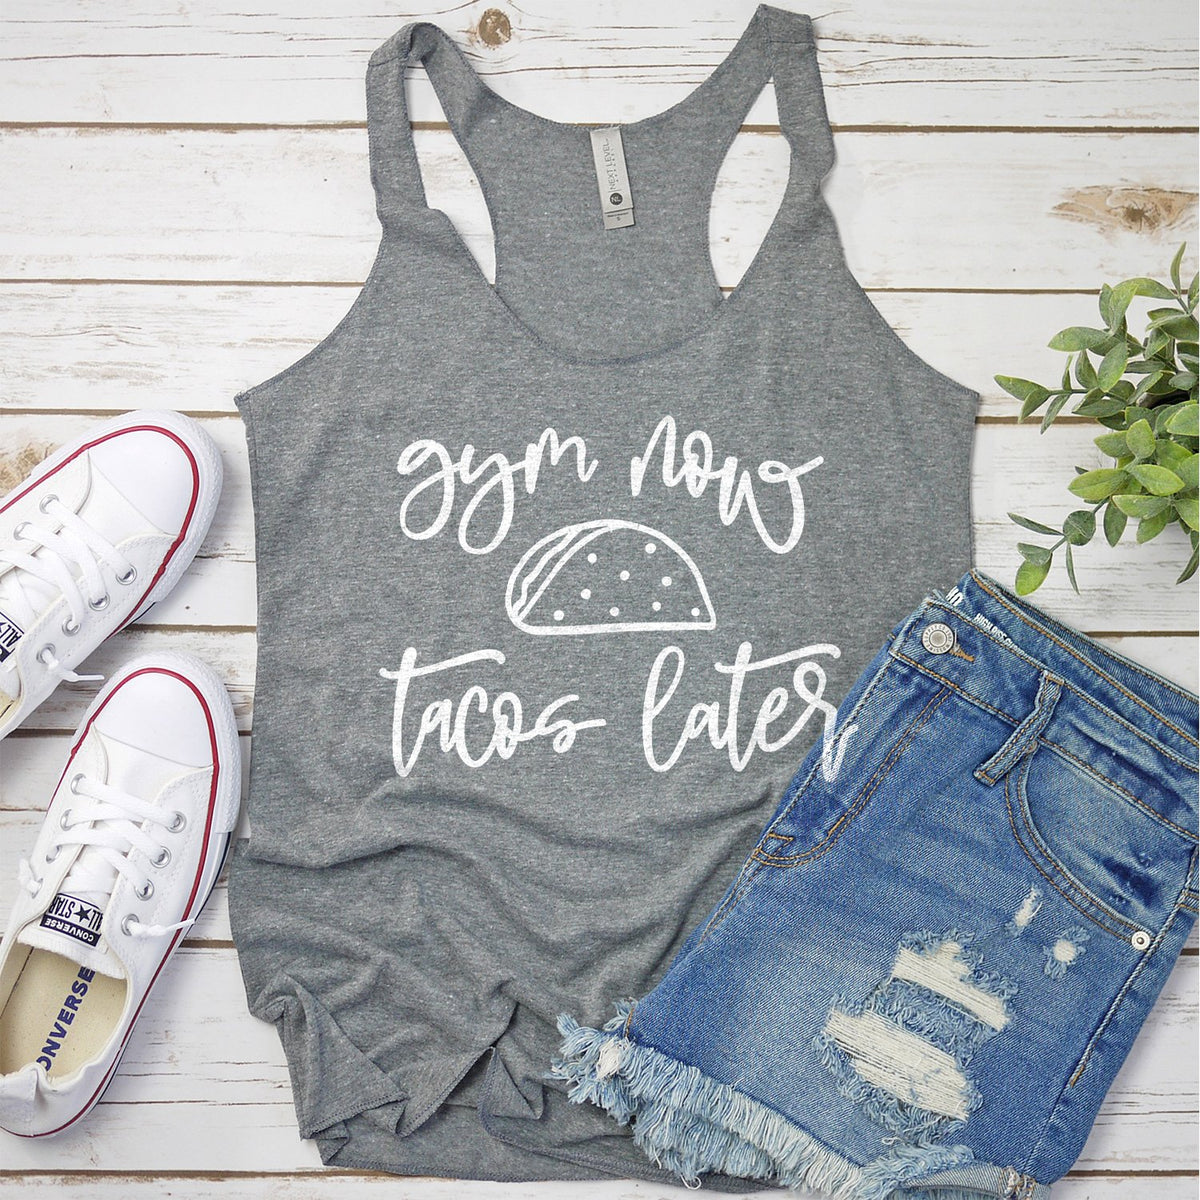 Gym Now Tacos Later - Tank Top Racerback